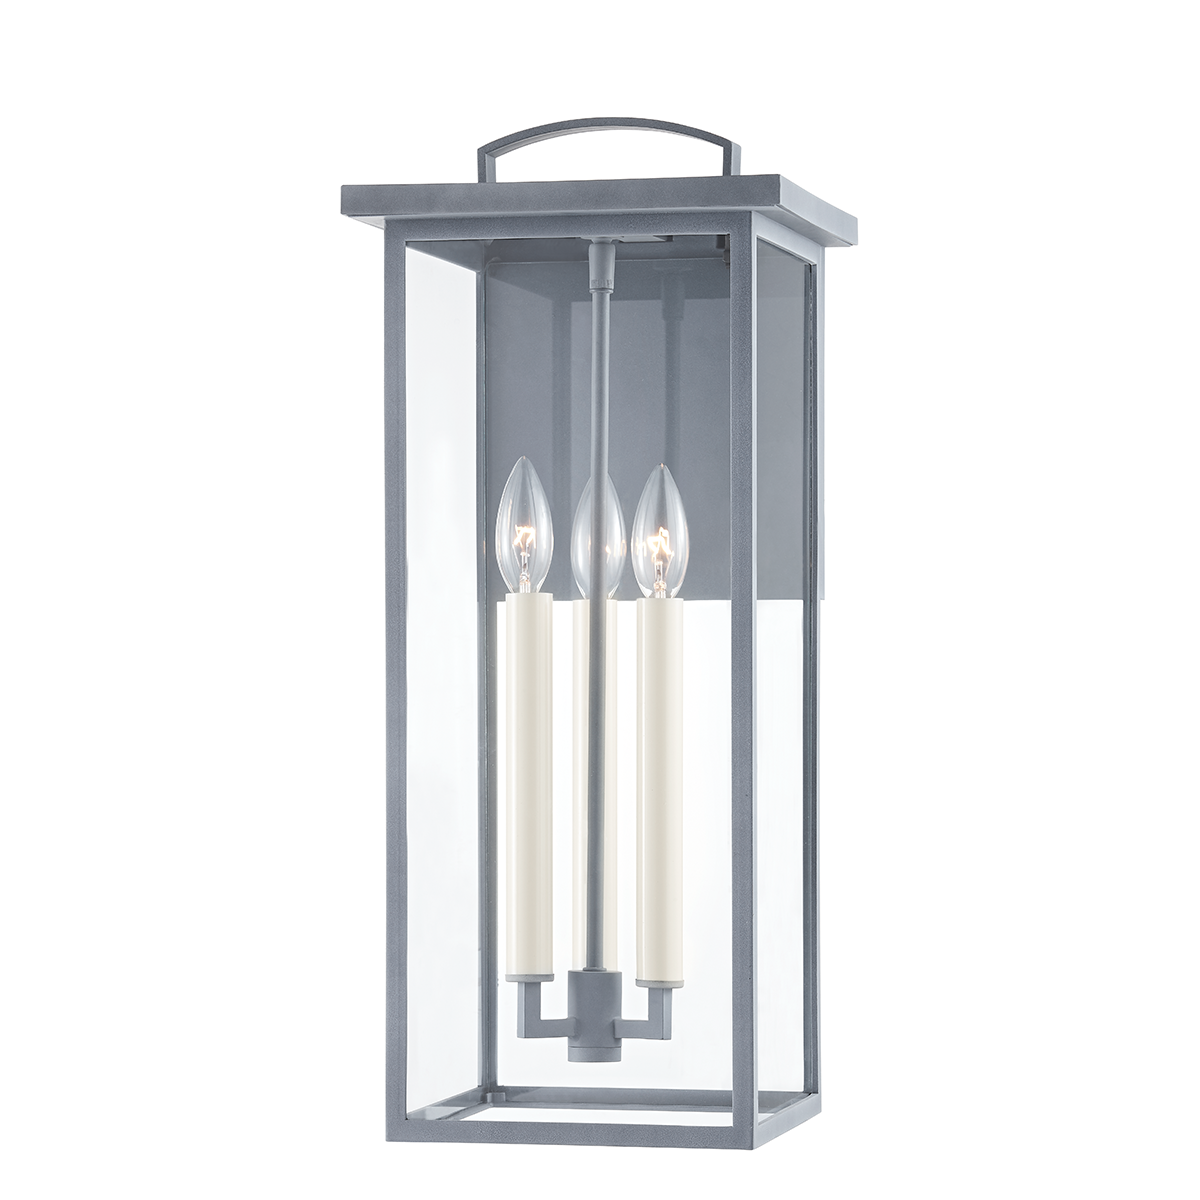 Troy Lighting 3 LIGHT LARGE EXTERIOR WALL SCONCE B7523 Outdoor l Wall Troy Lighting WEATHERED ZINC  